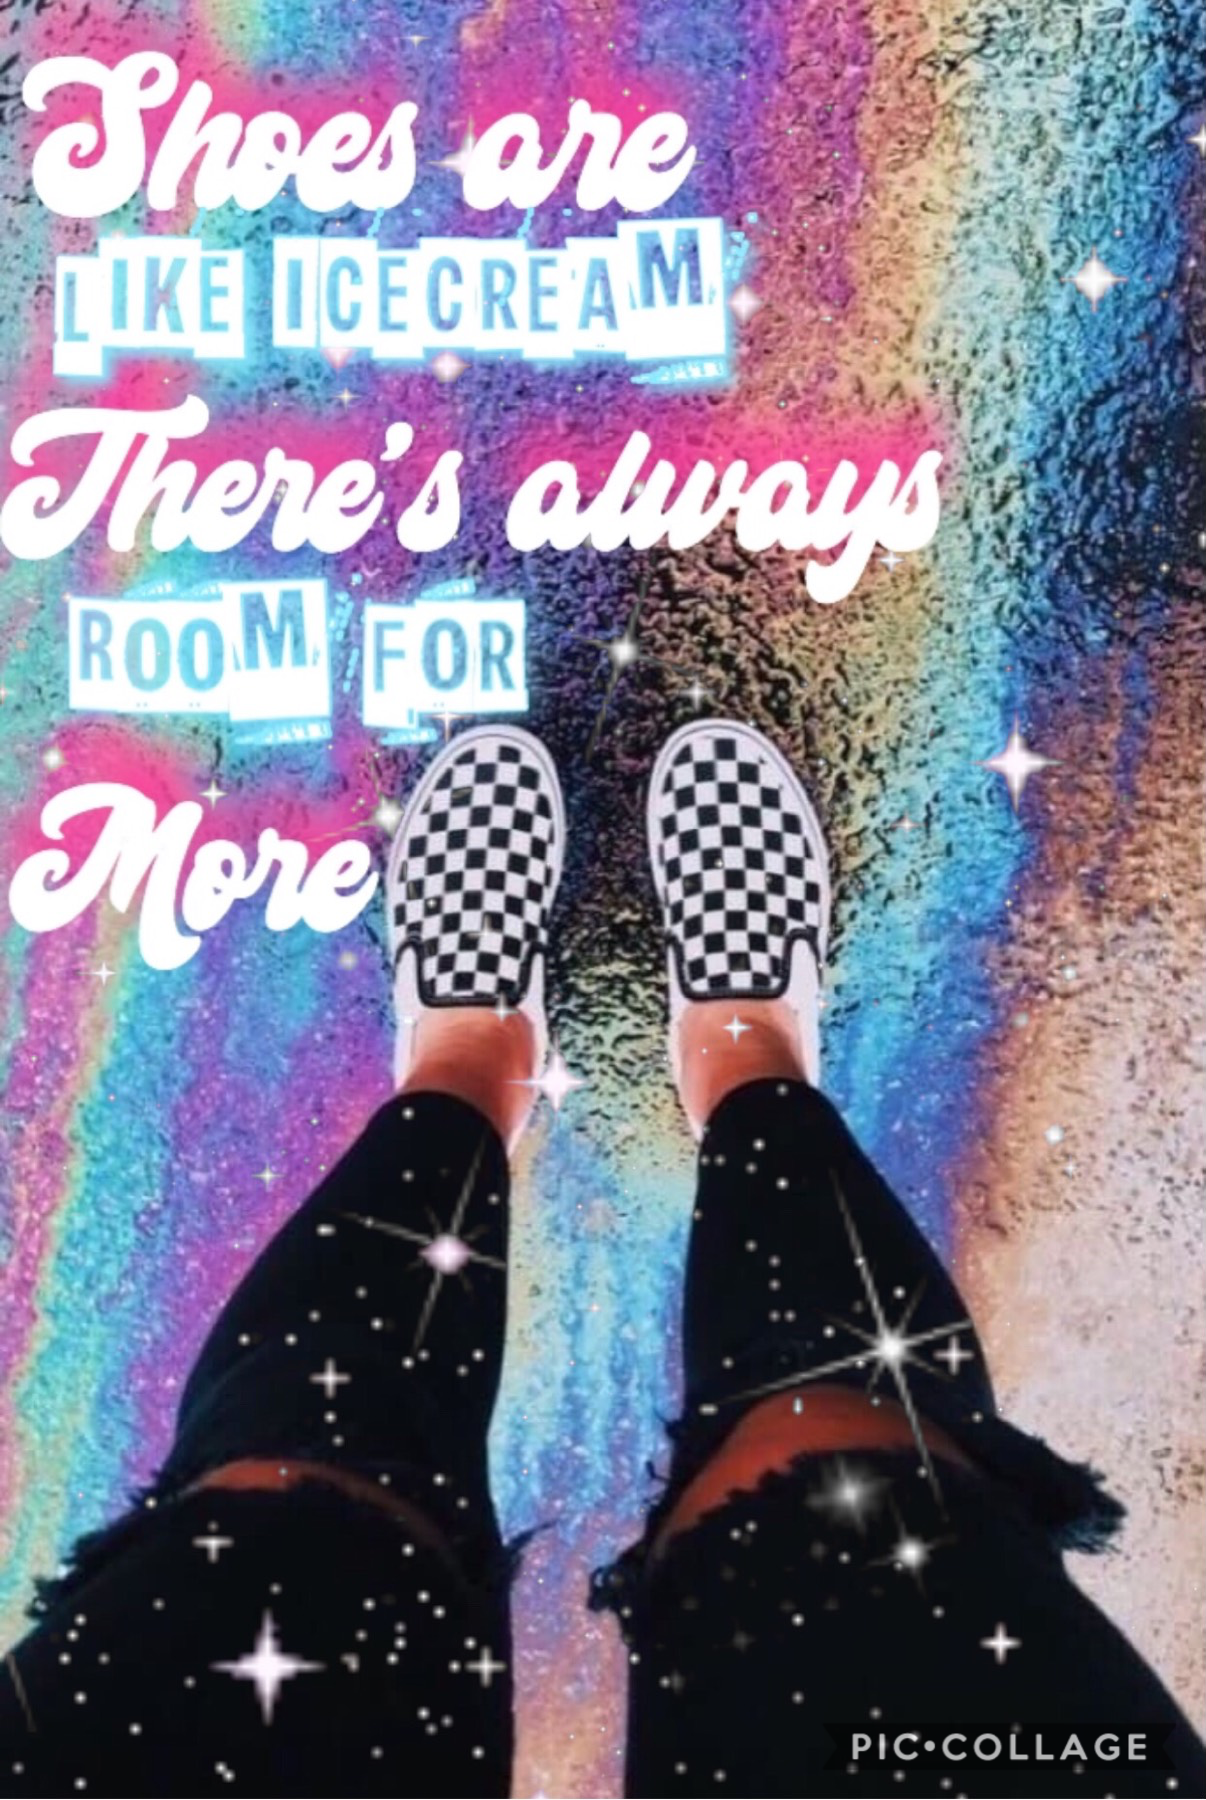 Entry to Reflections- contest! THANK U FOR PICKING THIS AWESOMEAND AMAZING BCKGROUND & QUOTE!! ❤️😝👌🥰🥰